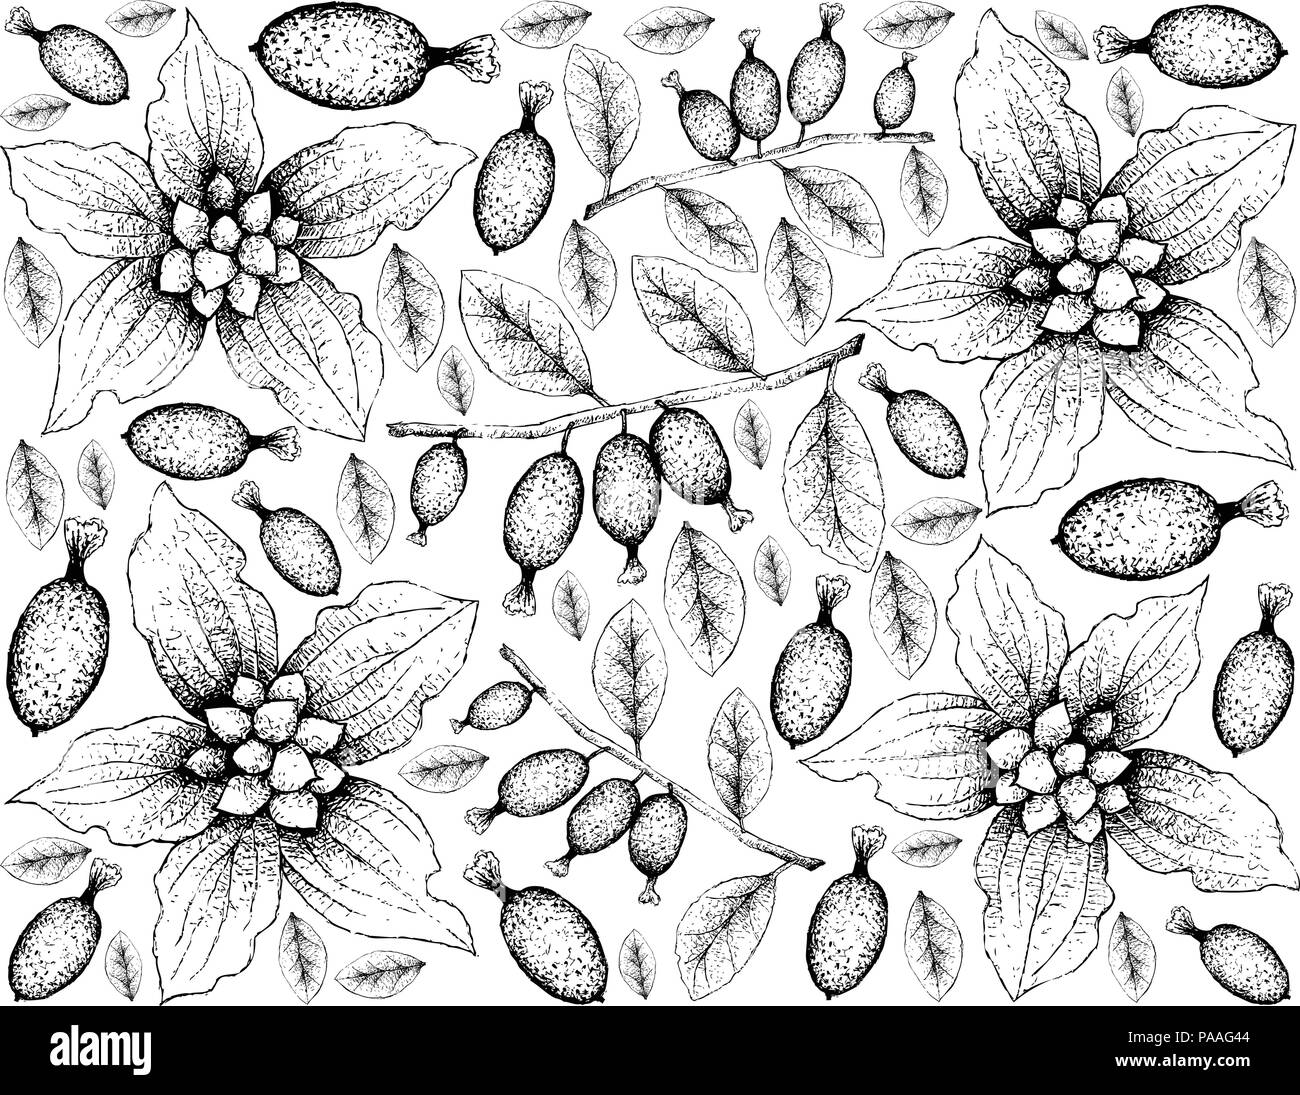 Berry Fruit, Illustration Wallpaper of Hand Drawn Sketch of Dwarf Dogwood or Cornus Canadensis and Elaeagnus Latifolia Fruits Isolated on White Backgr Stock Vector